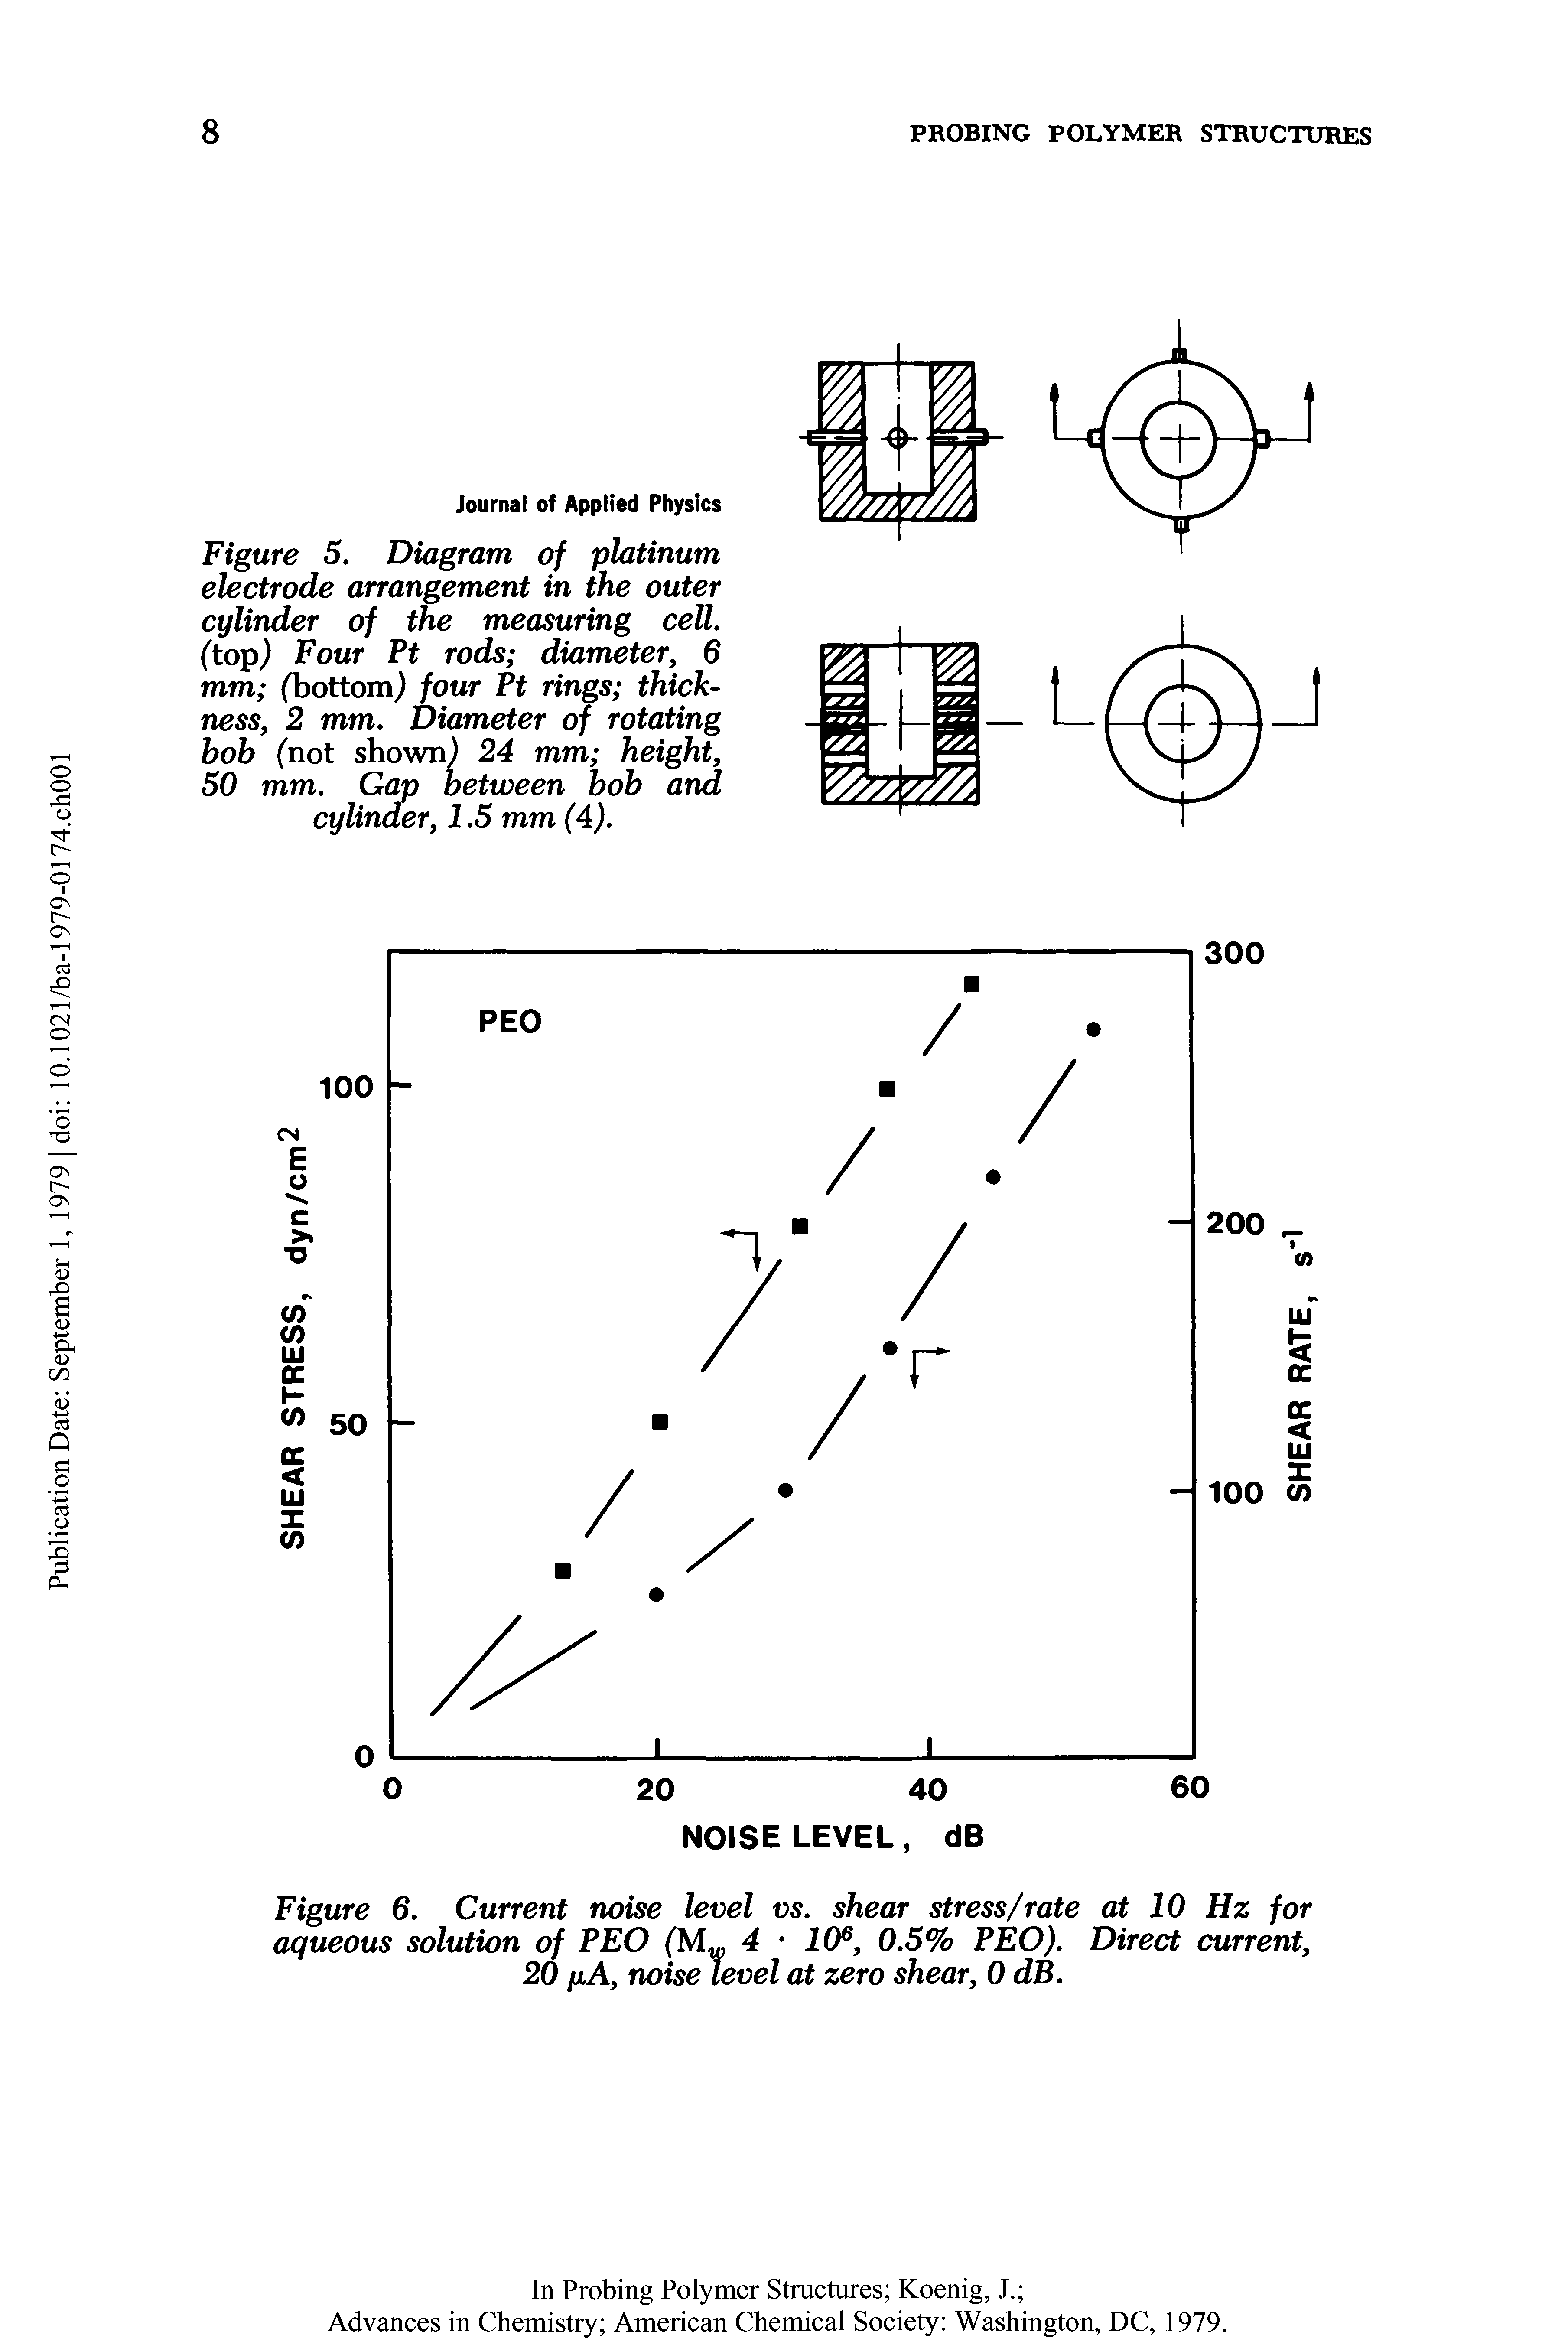 Figure 6, Current noise level vs, shear stress/rate at 10 Hz for aqueous solution of PEO 4 10, 0,5% PEO), Direct current, 20 fiA, noise level at zero shear, 0 dB,...